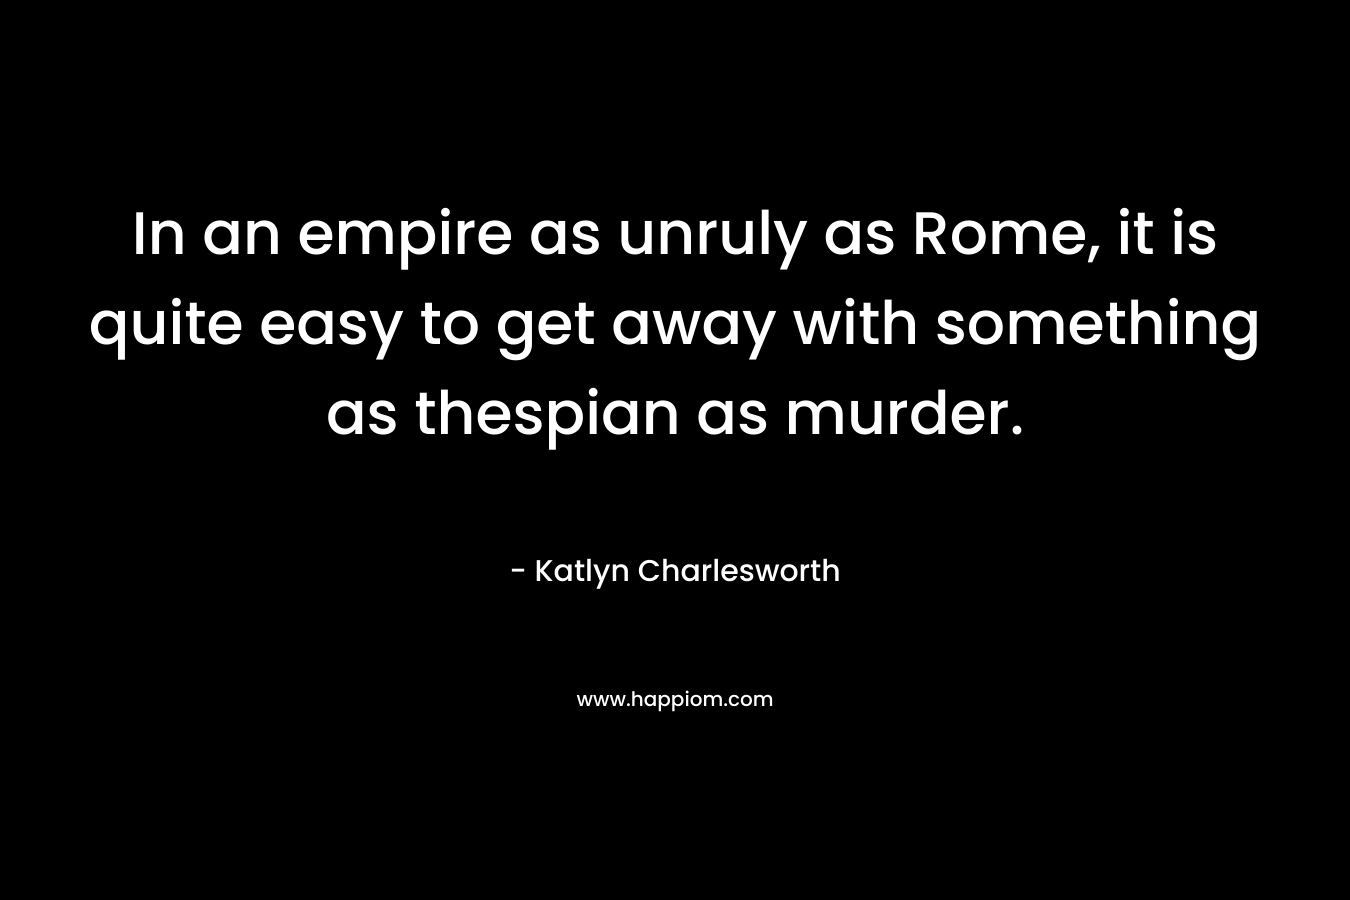 In an empire as unruly as Rome, it is quite easy to get away with something as thespian as murder. – Katlyn Charlesworth